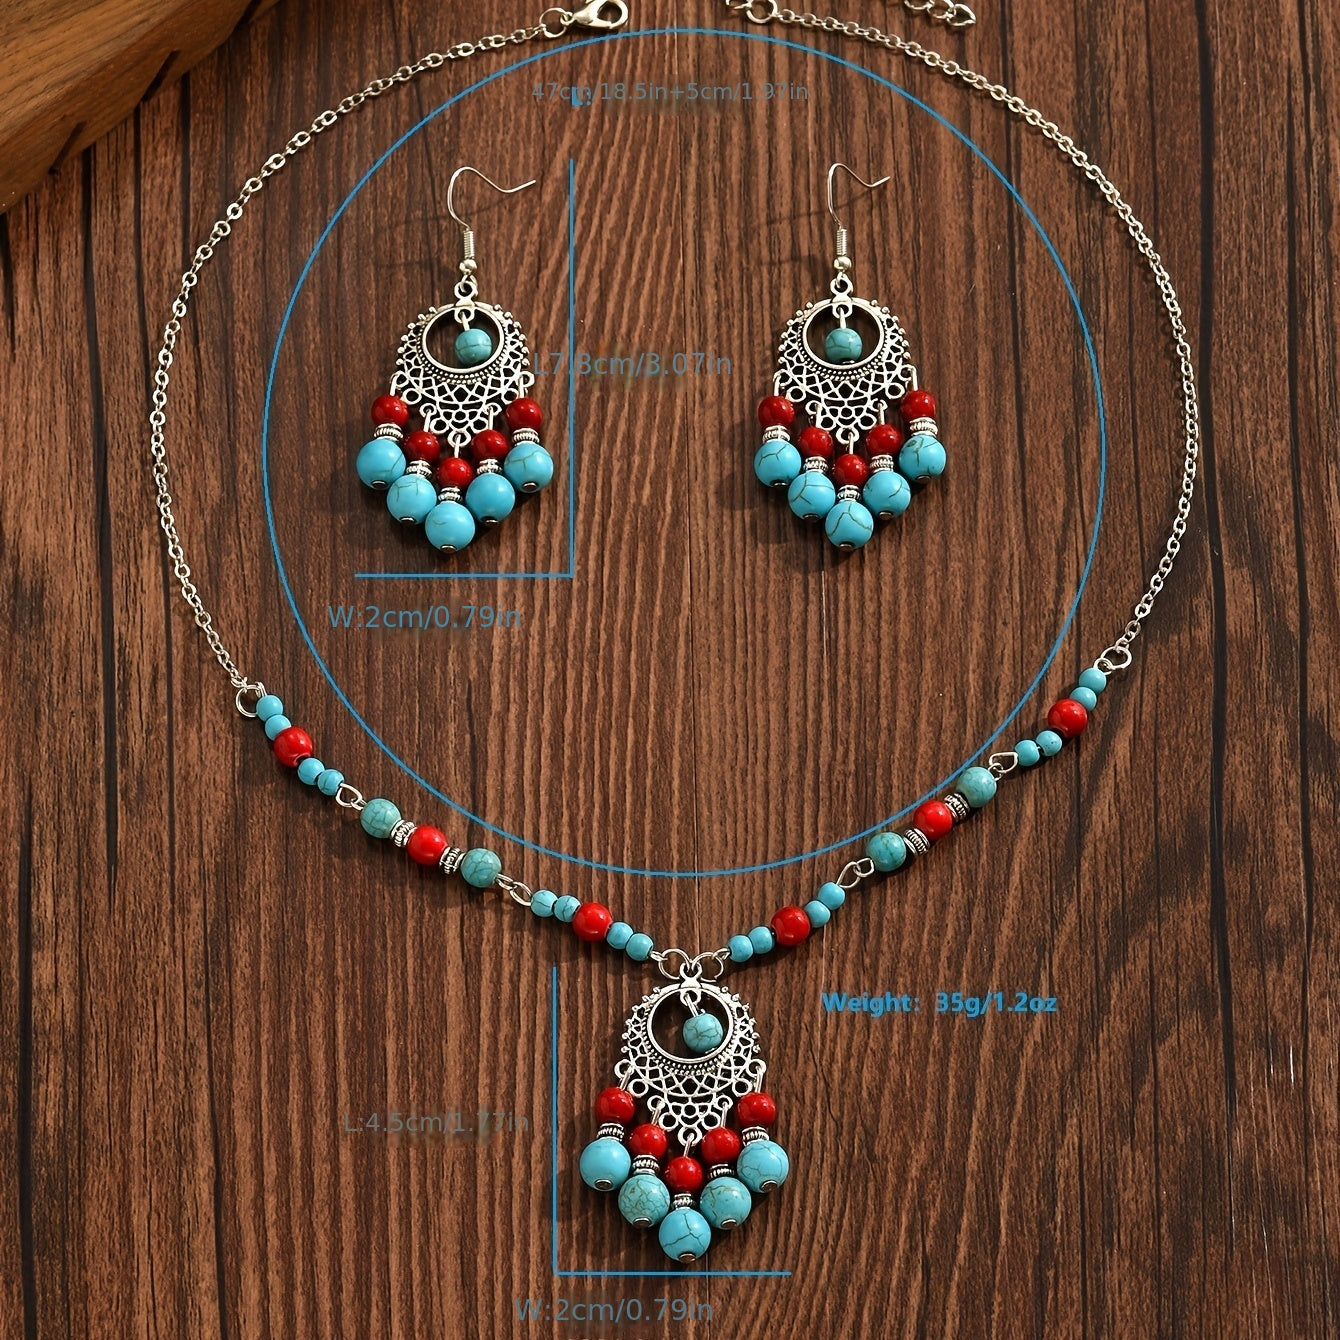 3pcs Earrings Plus Necklace Boho Style Jewelry Set Silver Plated Traditional Lantern Design Match Daily Outfits Perfect Decor For Summer Vacation